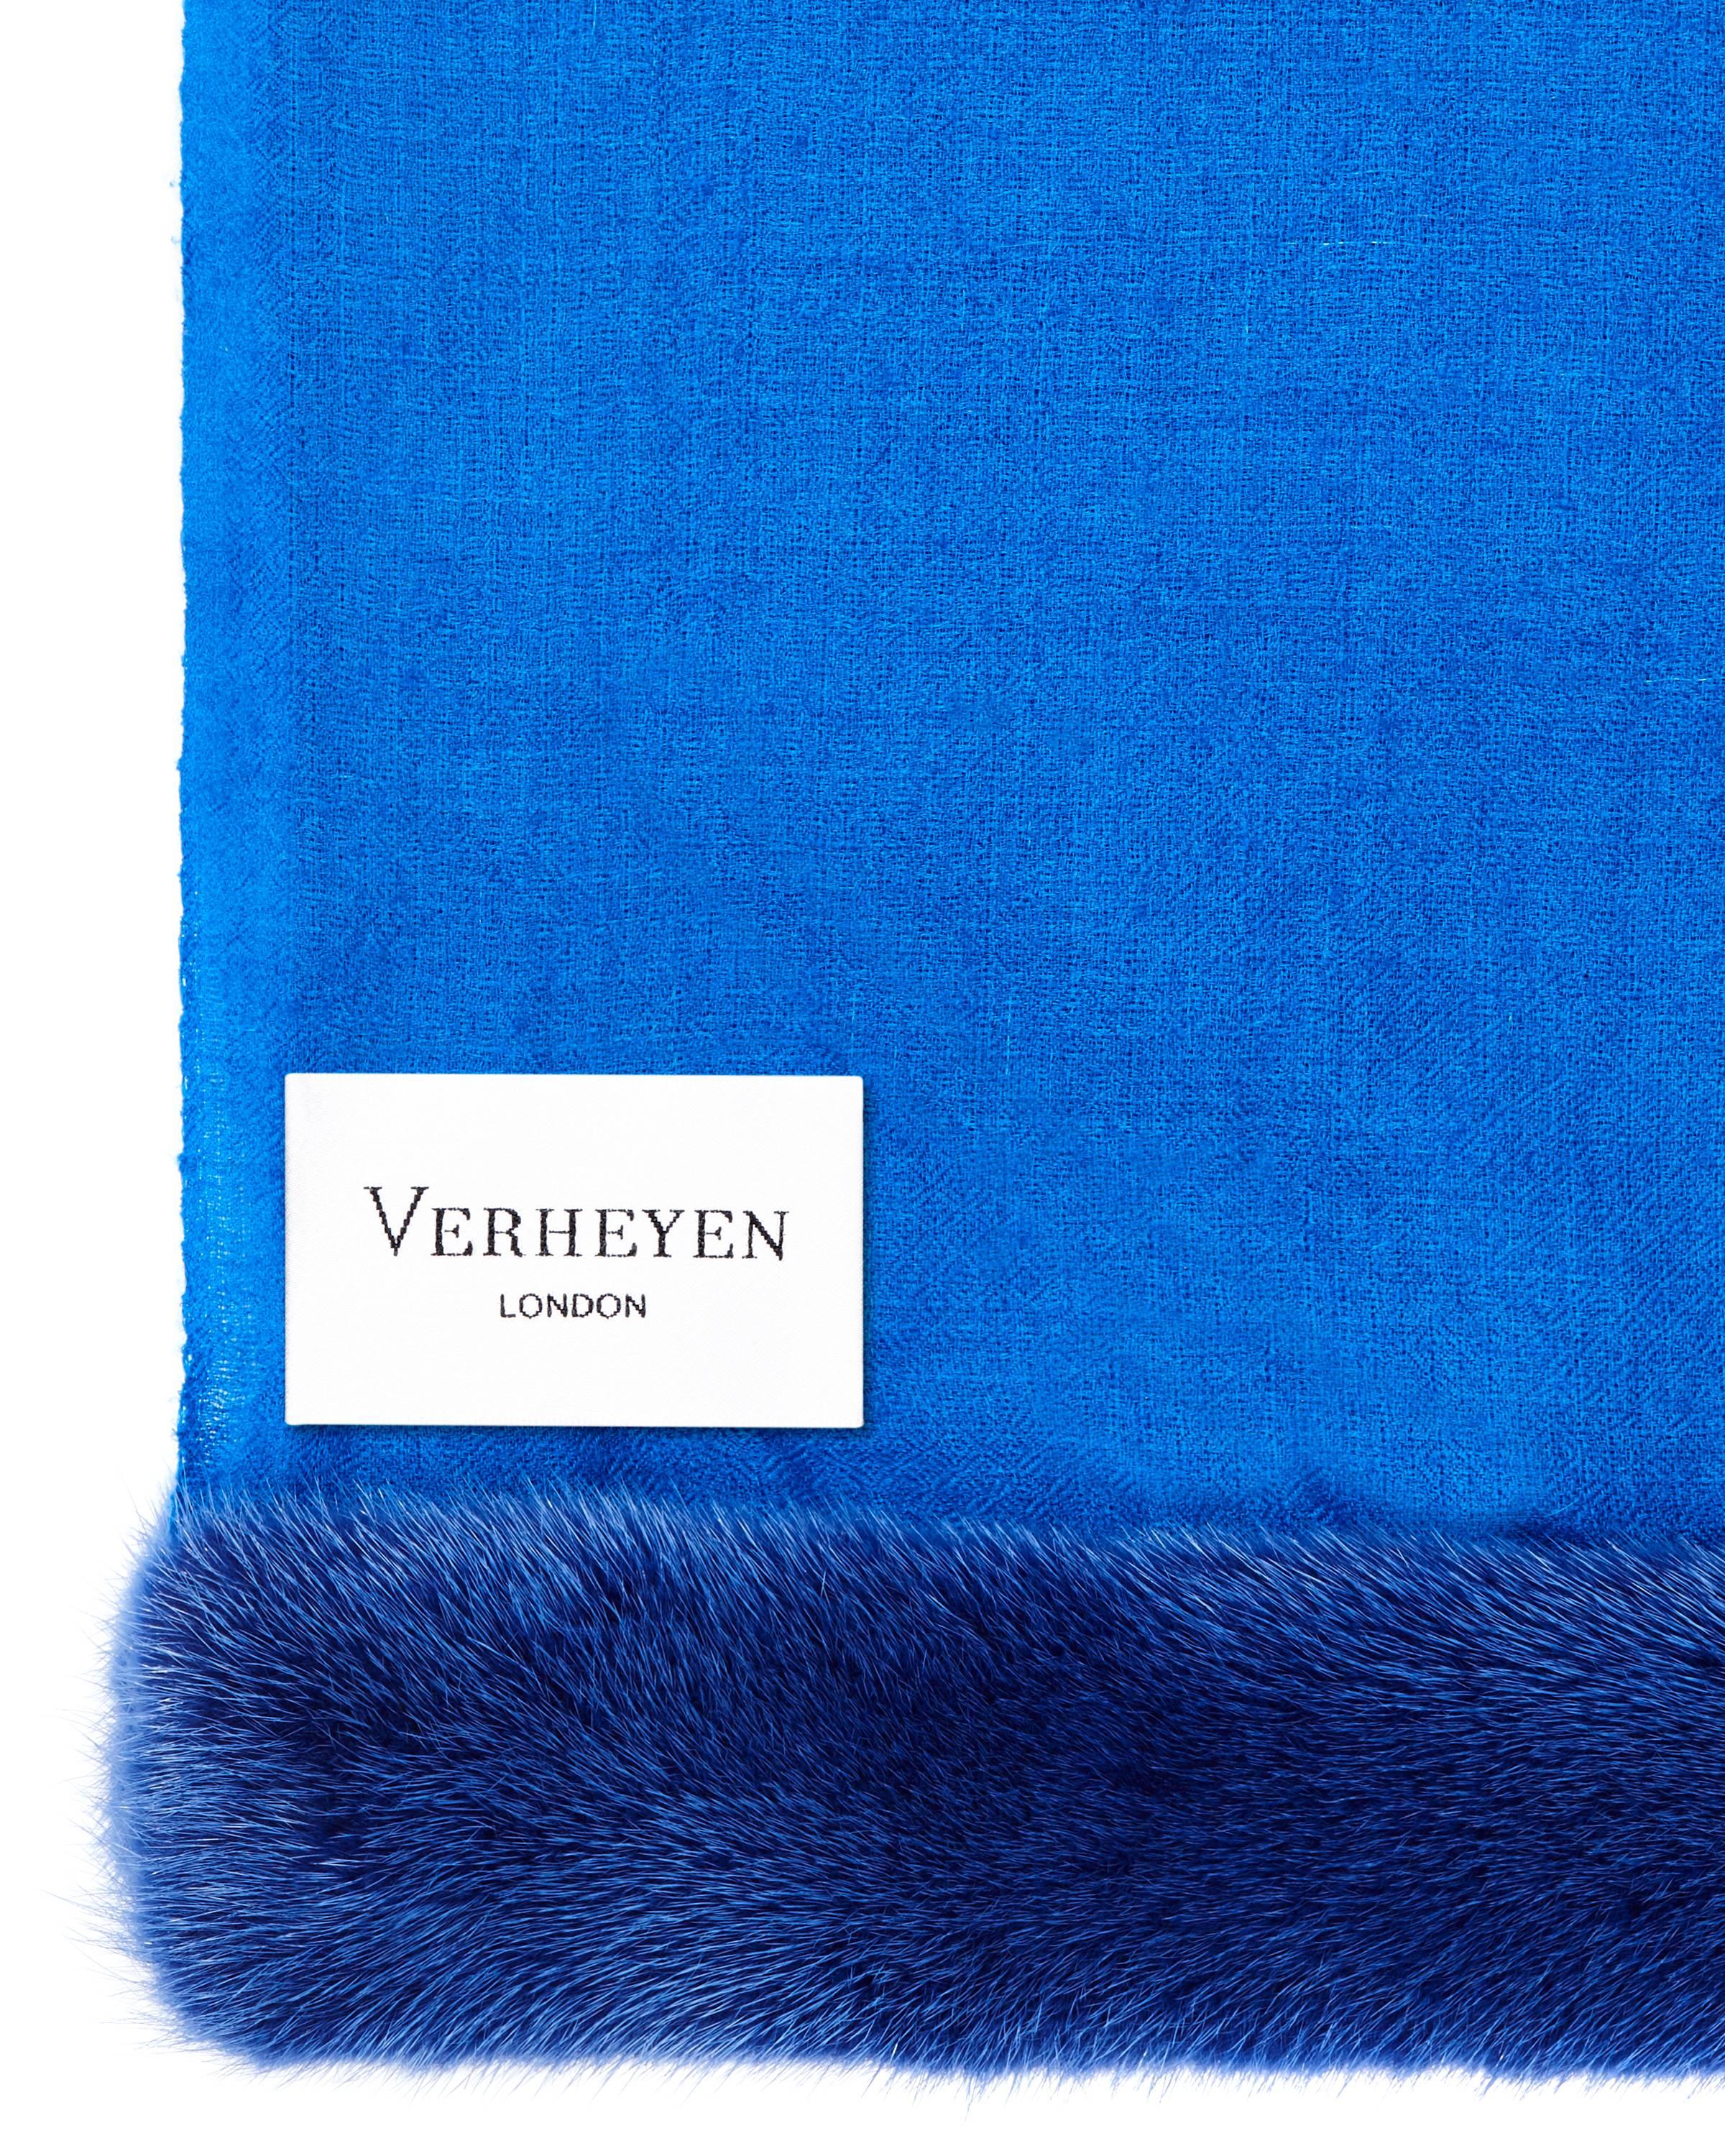 Verheyen London Handwoven Mink Fur Trimmed Cashmere Shawl in Blue - Brand New 

Verheyen London’s shawl is spun from the finest lightweight handwoven cashmere from Kashmir and finished with the most exquisite dyed mink. Its warmth envelopes you with